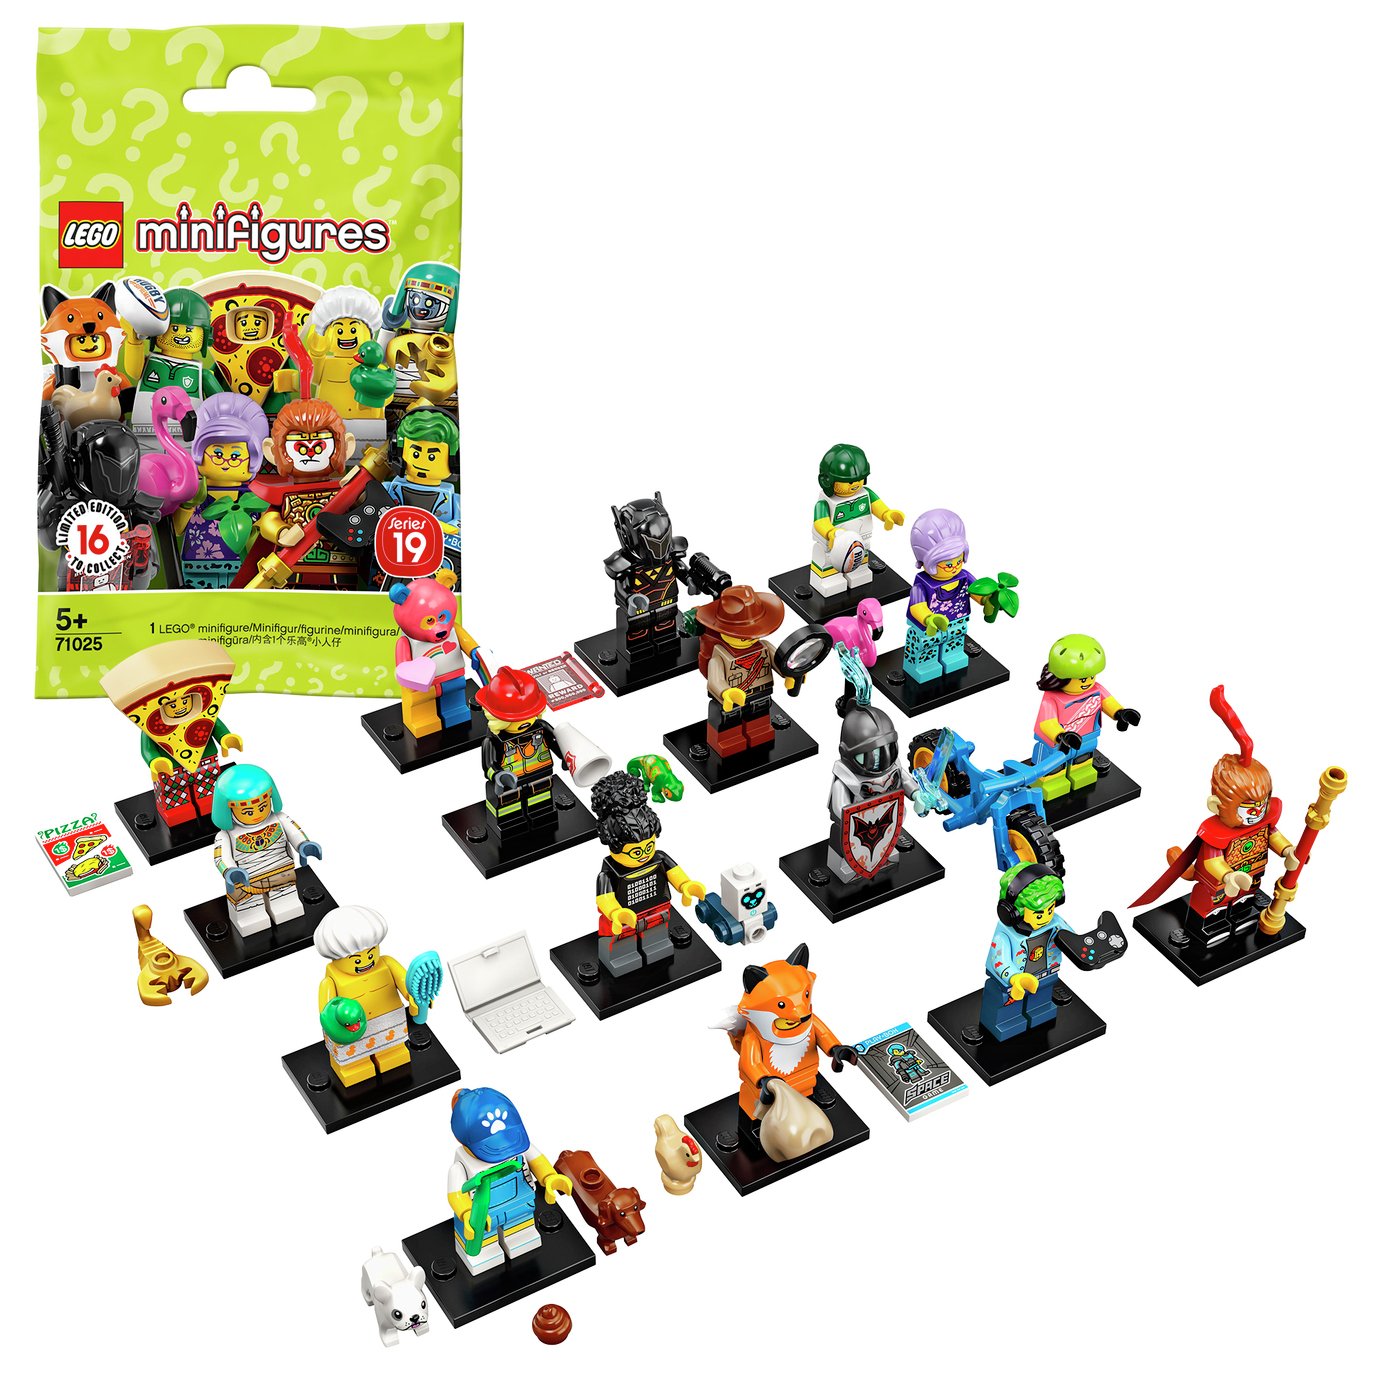 LEGO Minifigures Series 19 Limited Edition 71025